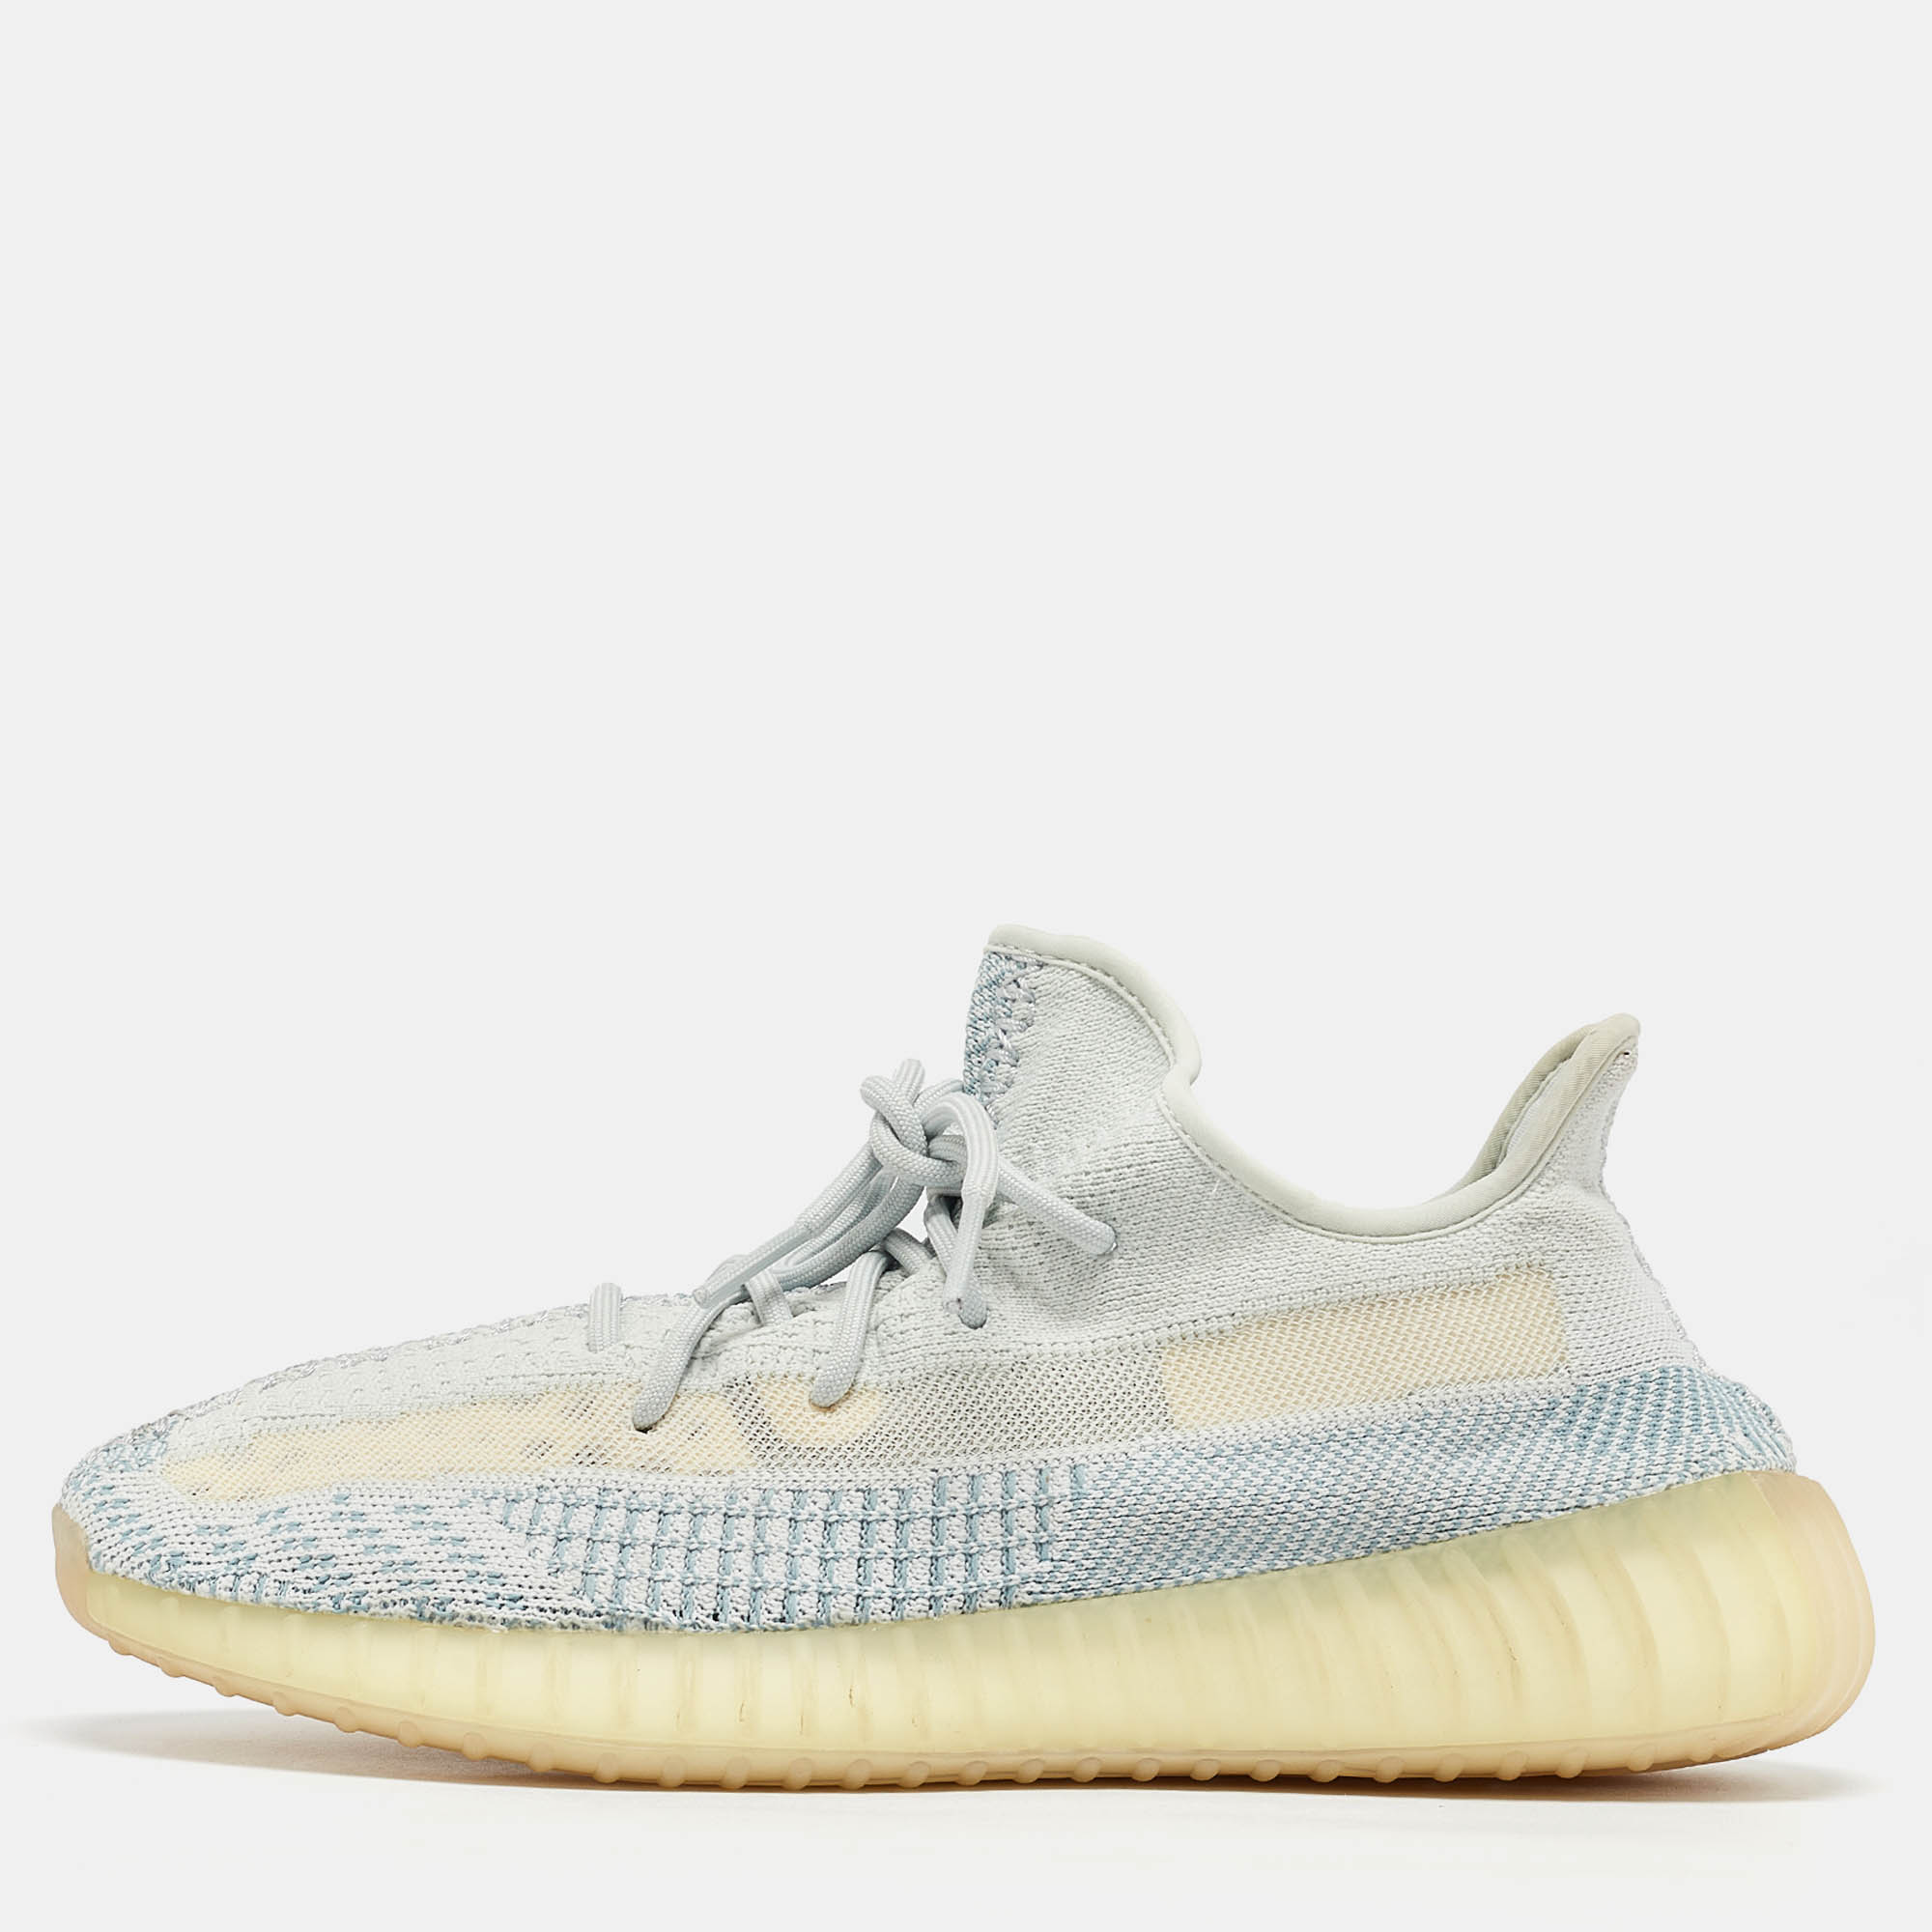 

Yeezy x Adidas Blue/White Knit Fabric Boost 350 V2 Cloud White Low Top Sneakers Size 45 1/3